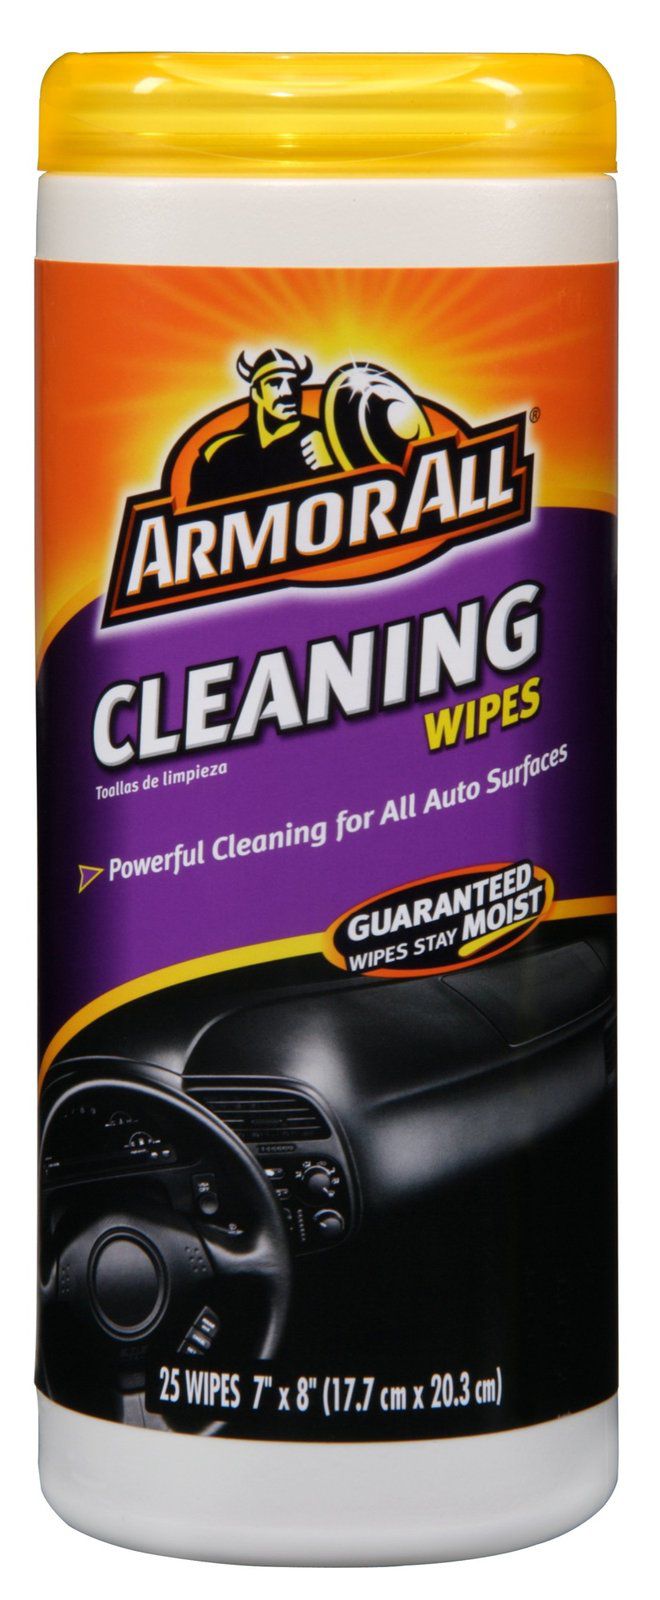 Armor All MULTI PURPOSE CLEANING WIPES 25CT